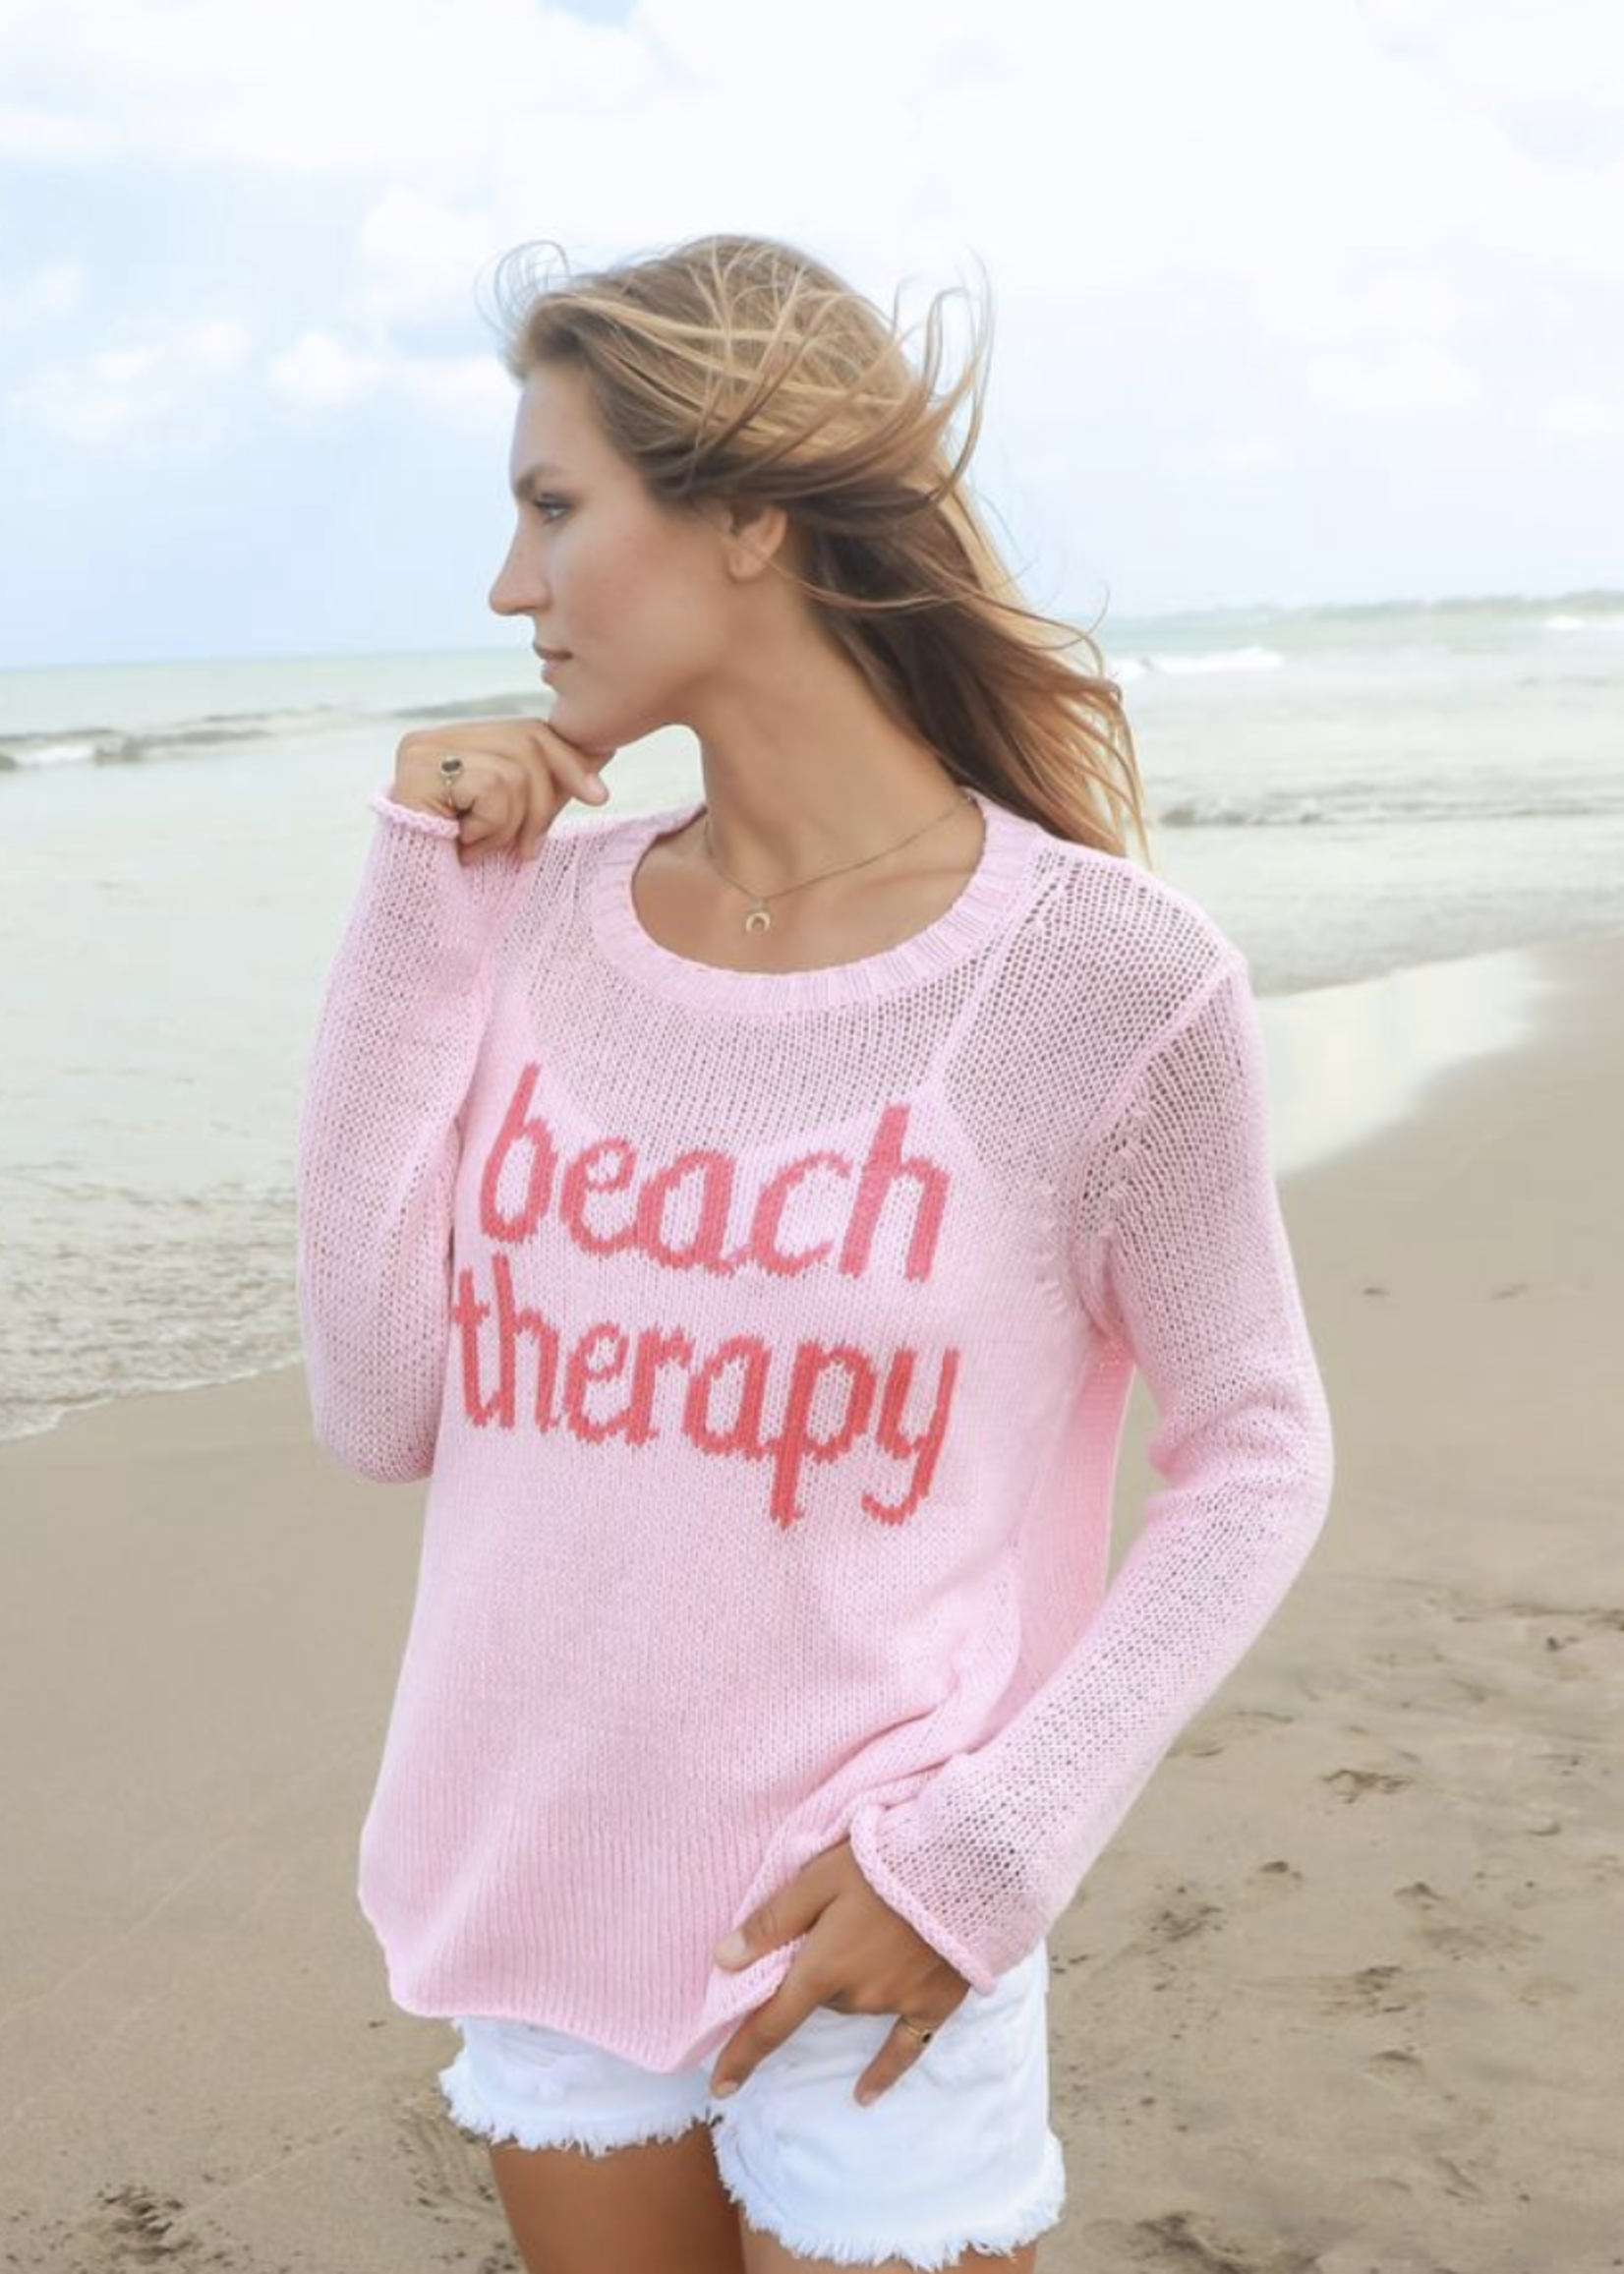 WOODEN SHIPS BEACH THERAPY CREW COTTON SWEATER